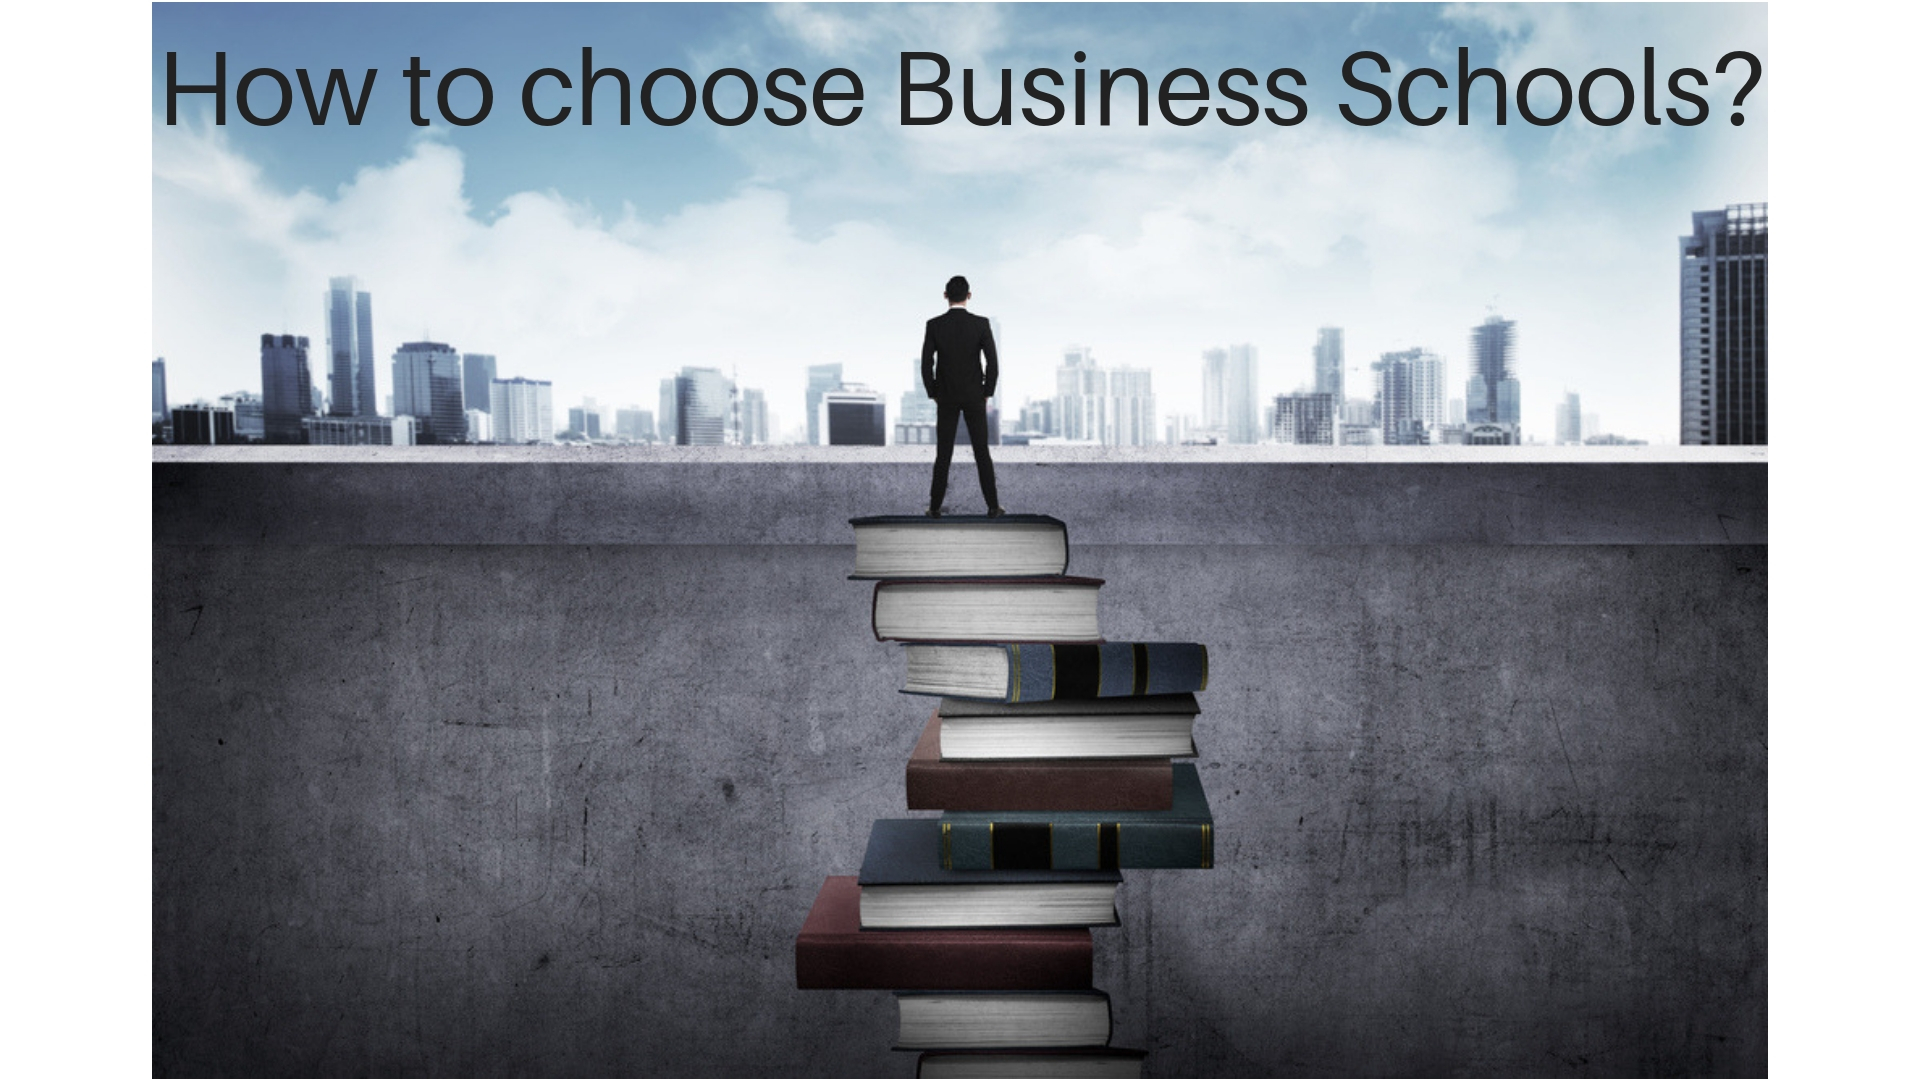 6 Steps – How to choose a Business School | Finding the right business school fit